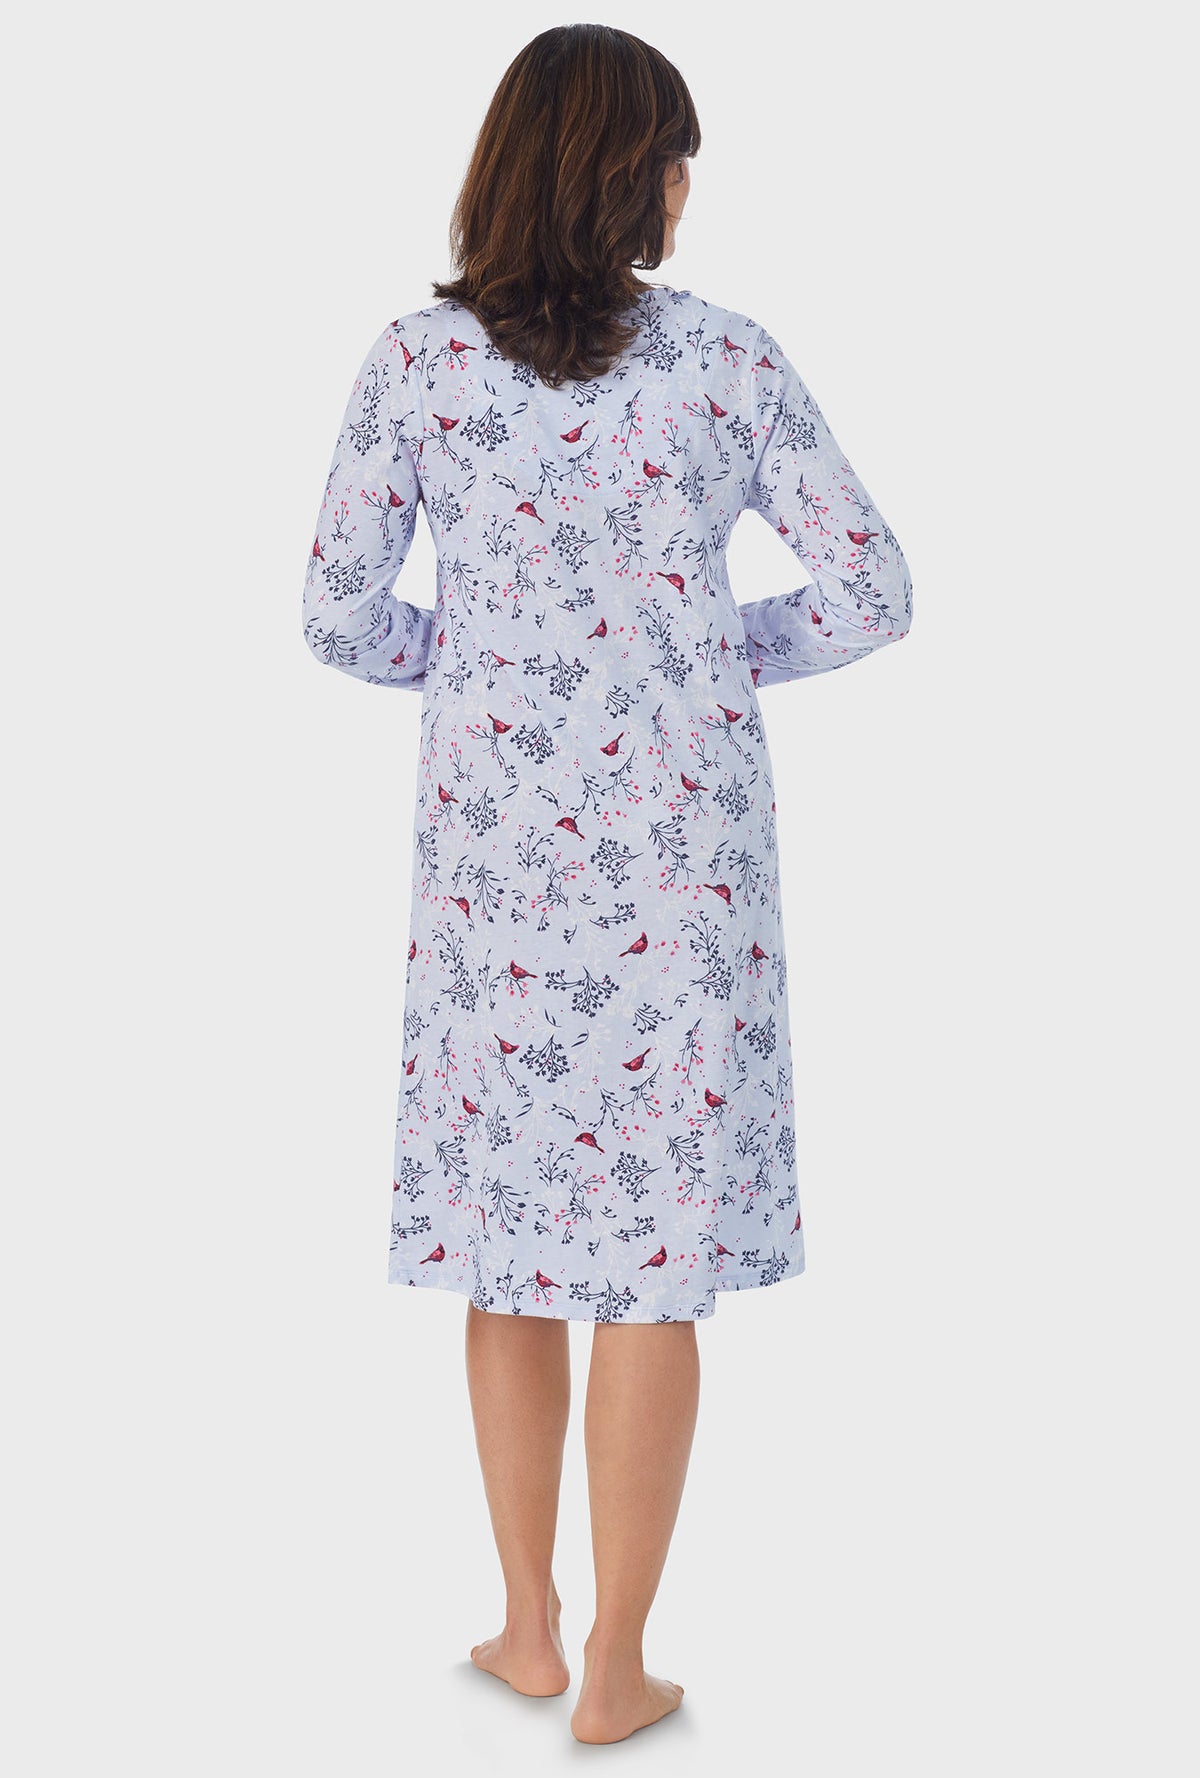 A lady wearing white Long Sleeve Midi Nightgown with Winter Blue Cardinal  print